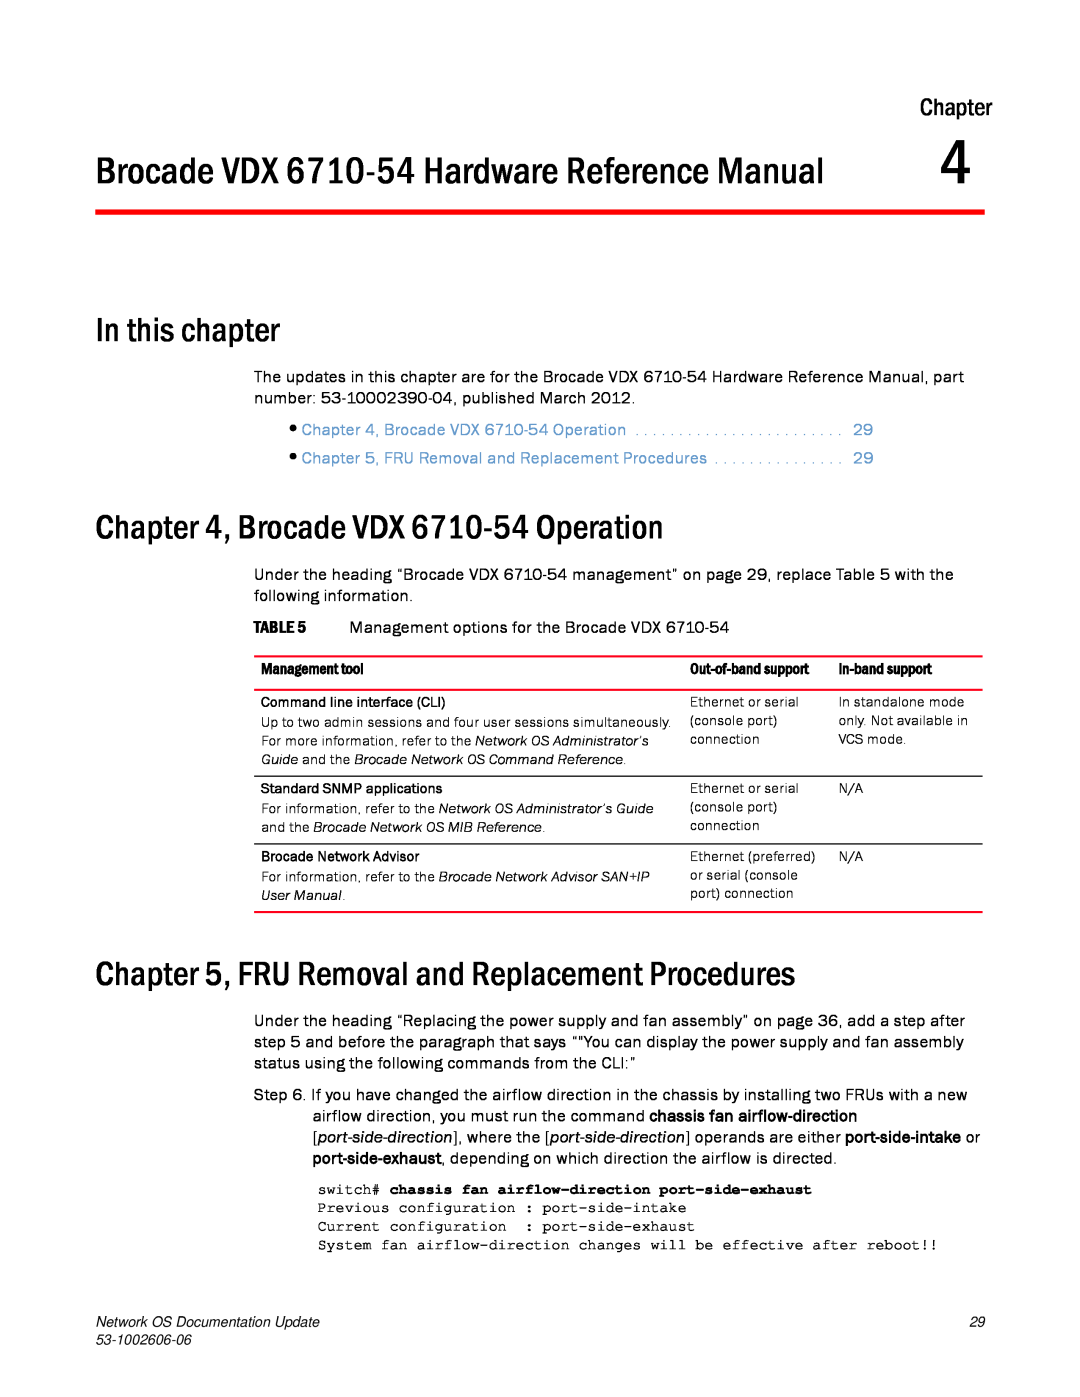 Brocade Communications Systems 2.1 Brocade VDX 6710-54 Hardware Reference Manual, Brocade VDX 6710-54 Operation, Chapter 